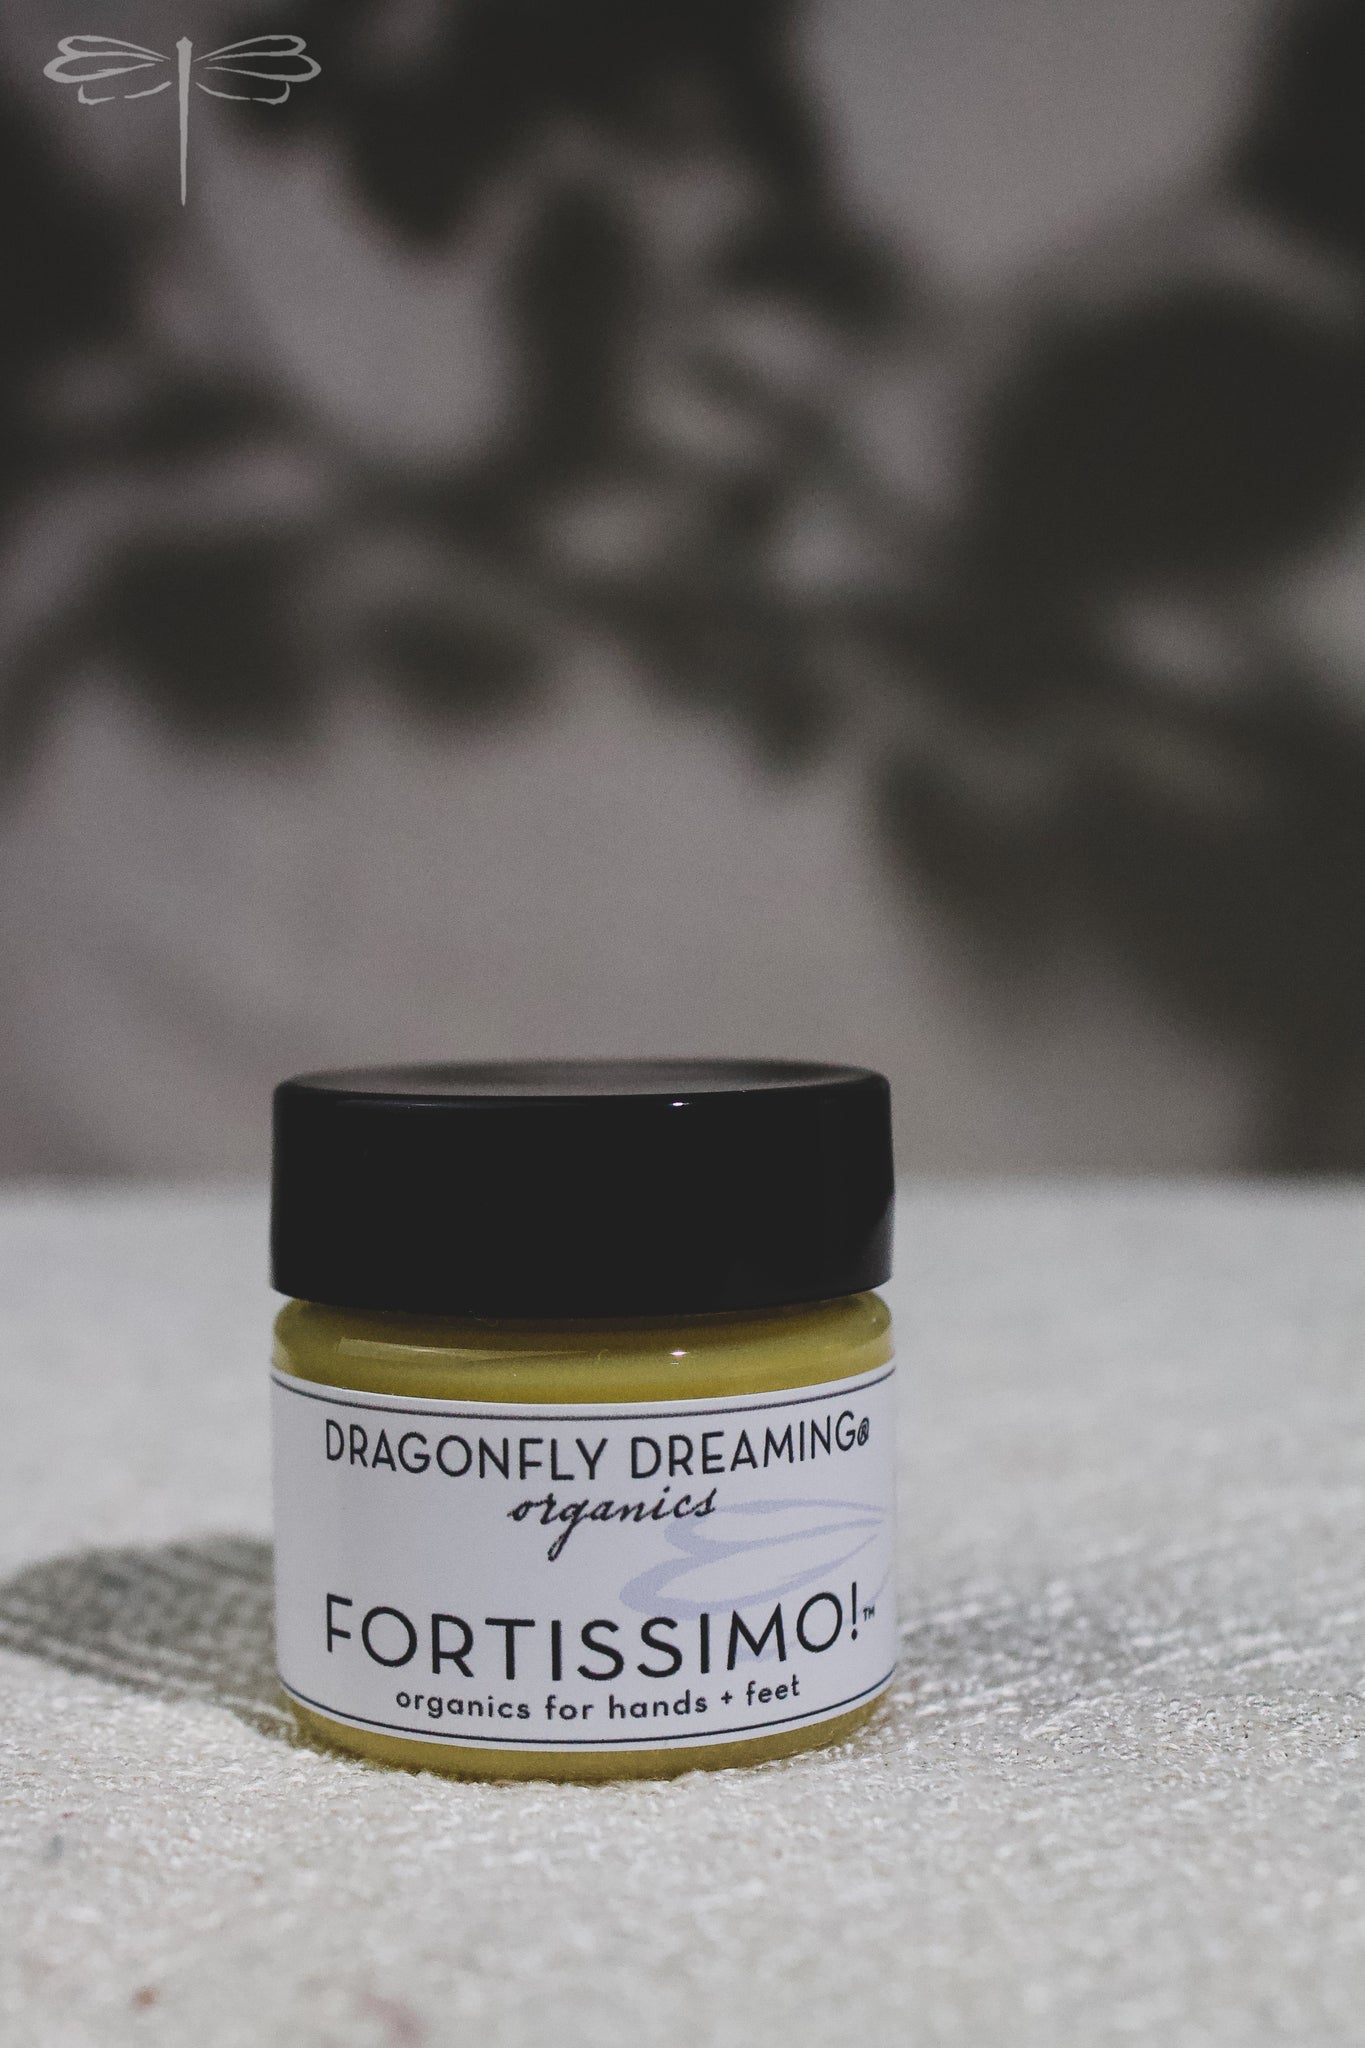 Pictured here, 18mL Fortissimo Serious Salve by Dragonfly Dreaming Organics